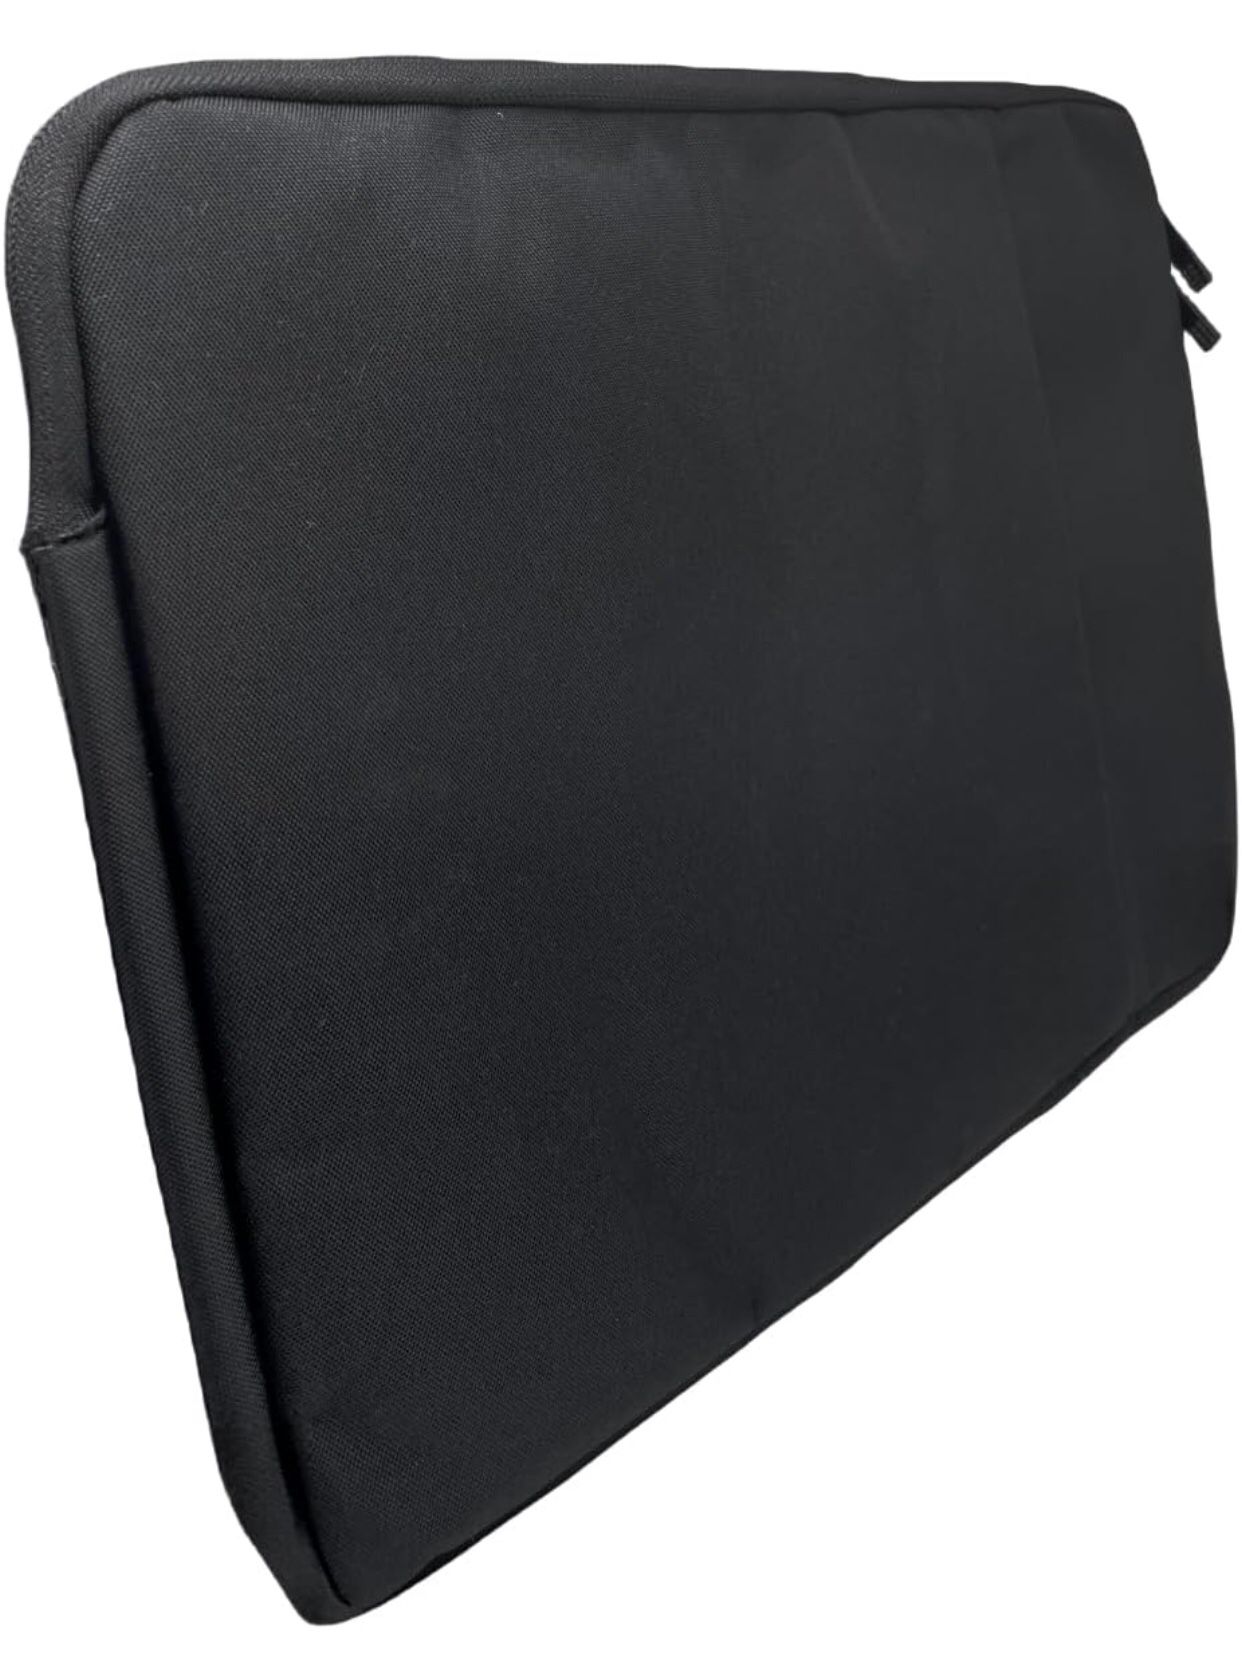 Basics 14-Inch Laptop Sleeve with grey Handle, Protective Case with Zipper - Black